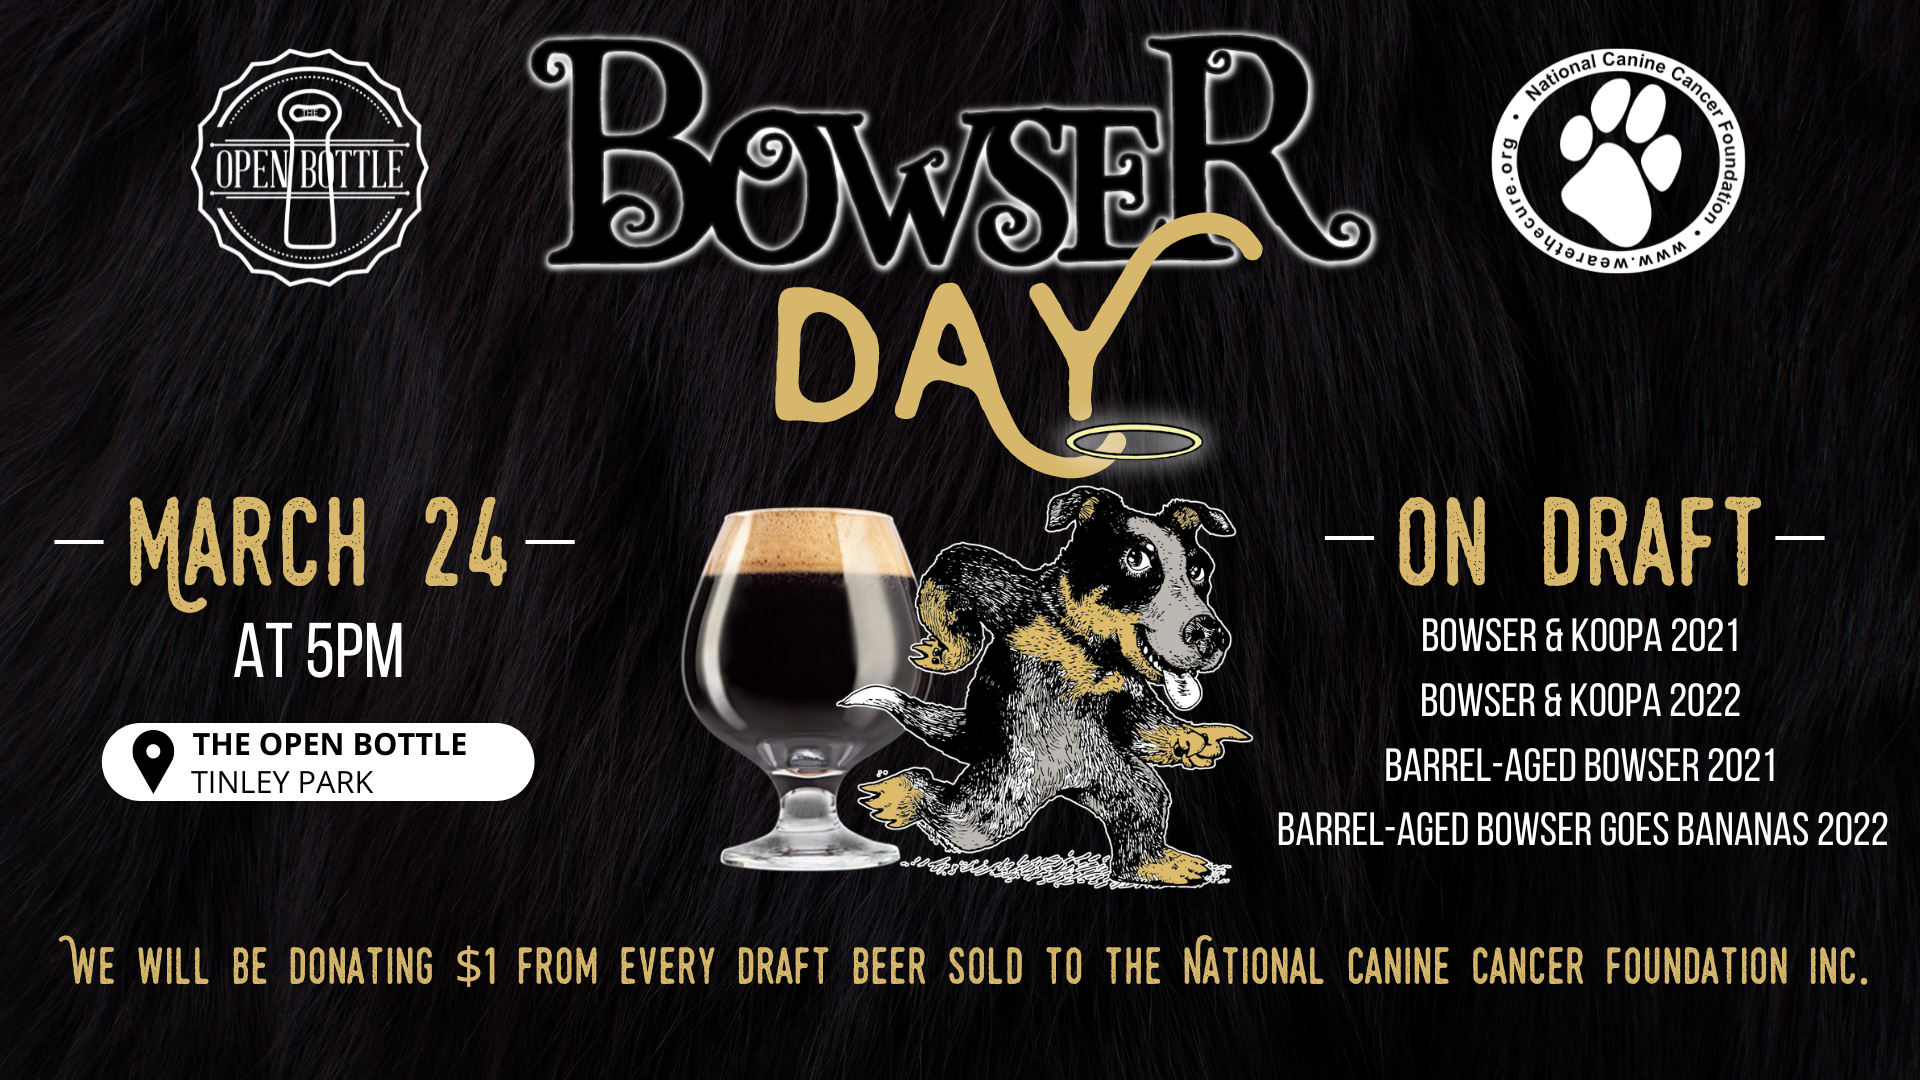 Event: Bowser Day